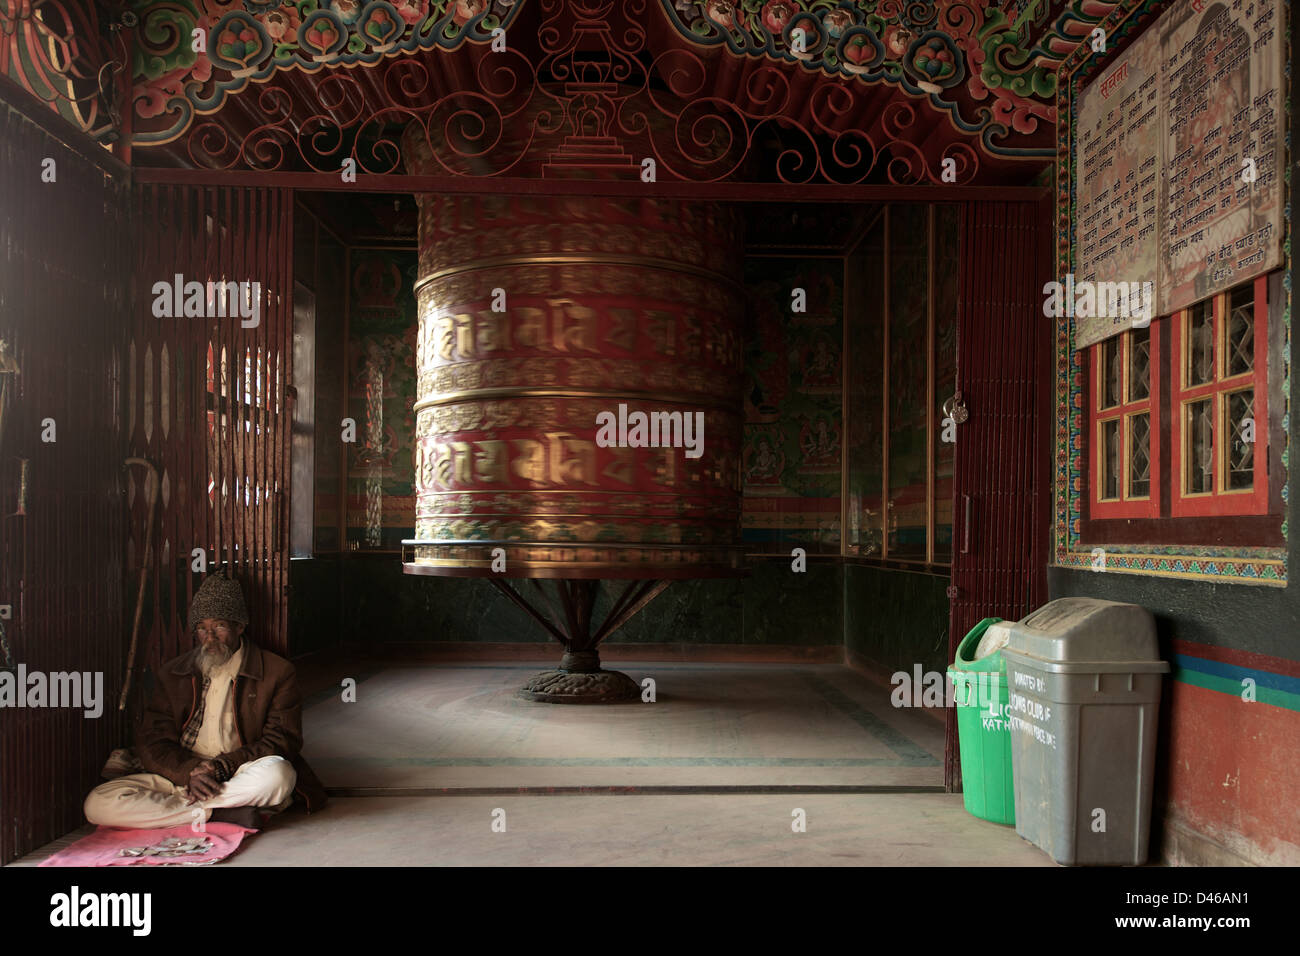 The largest prayer wheel at Boudhanath Stupa and the surrounding temples spins behind an elderly Buddhist worshiper. Stock Photo